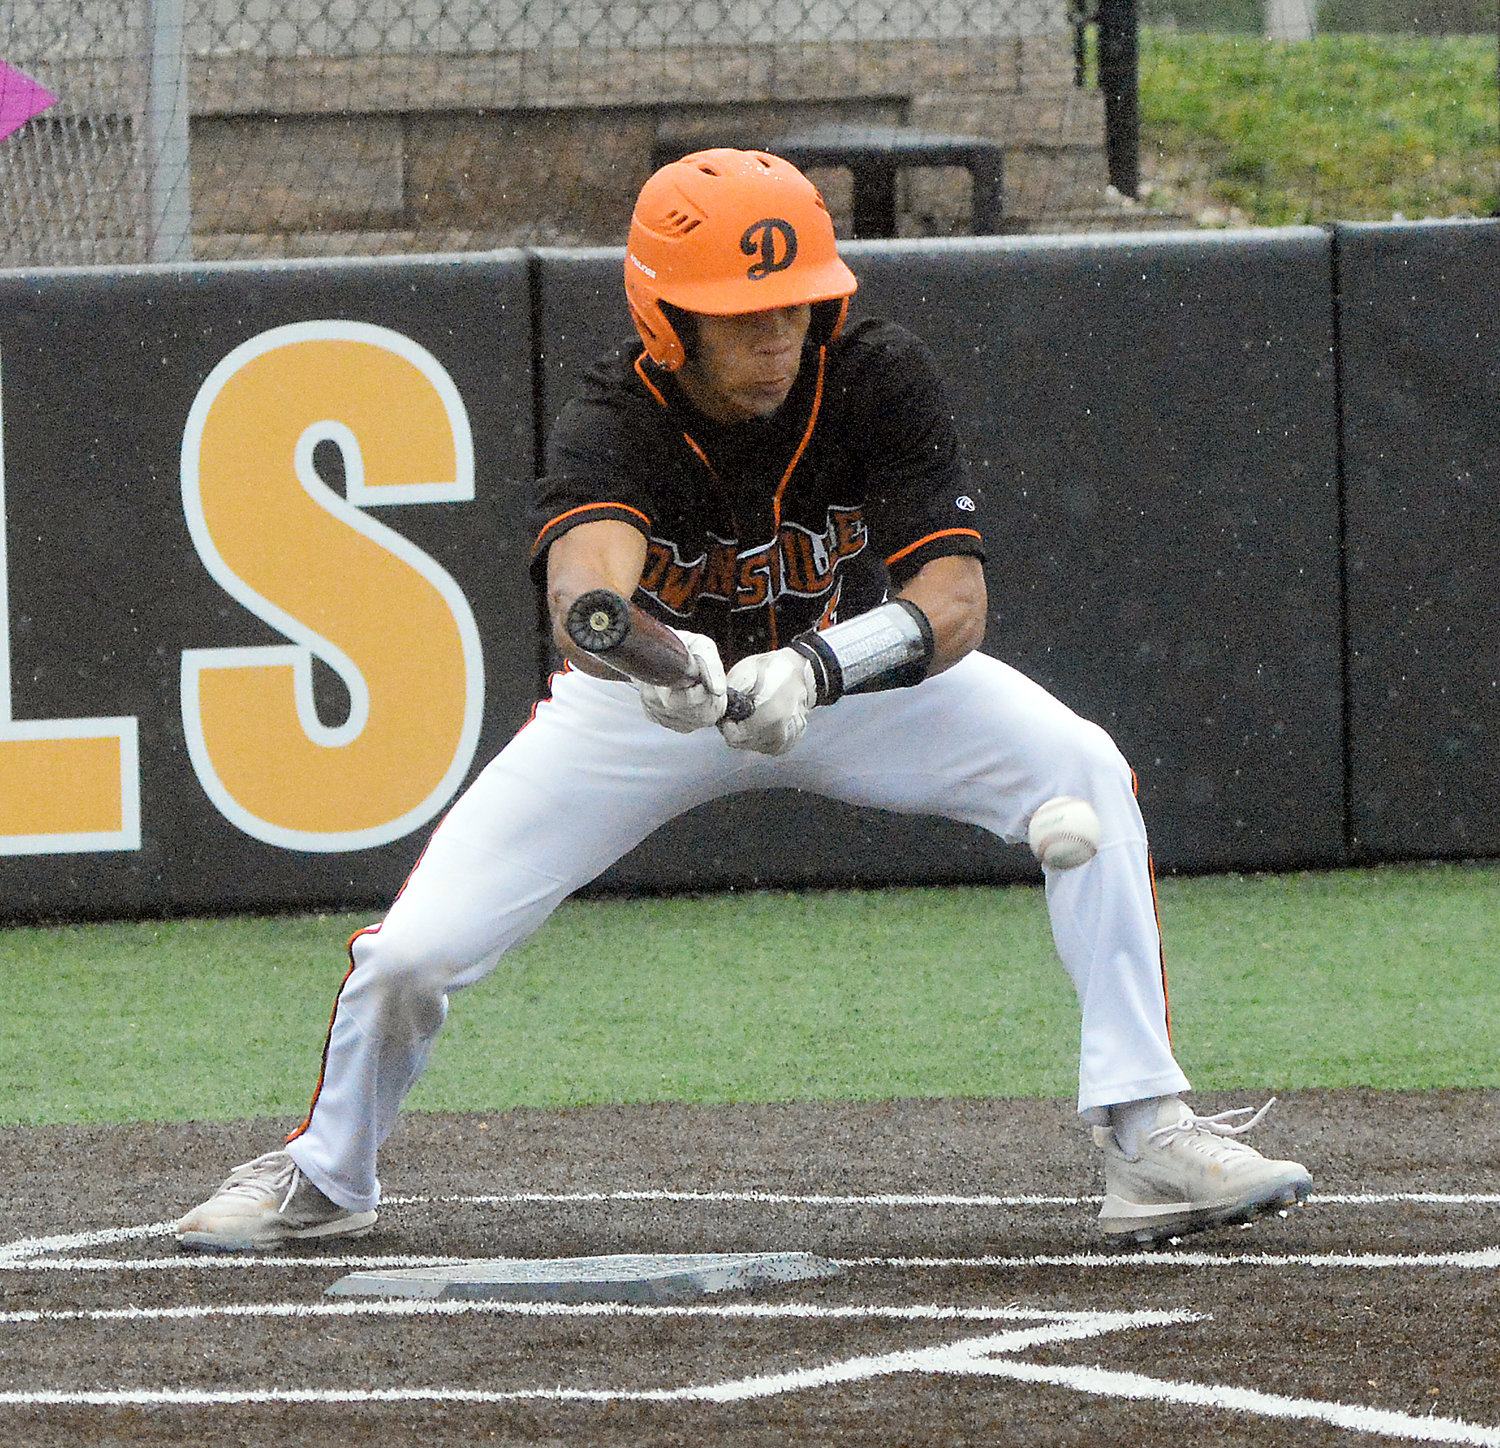 Dezmyn Moore squares to bunt during Owensville’s 7-6 loss to Hermann in game one of a Four Rivers Conference (FRC) varsity baseball twin bill at OHS Field last Wednesday in rainy conditions.